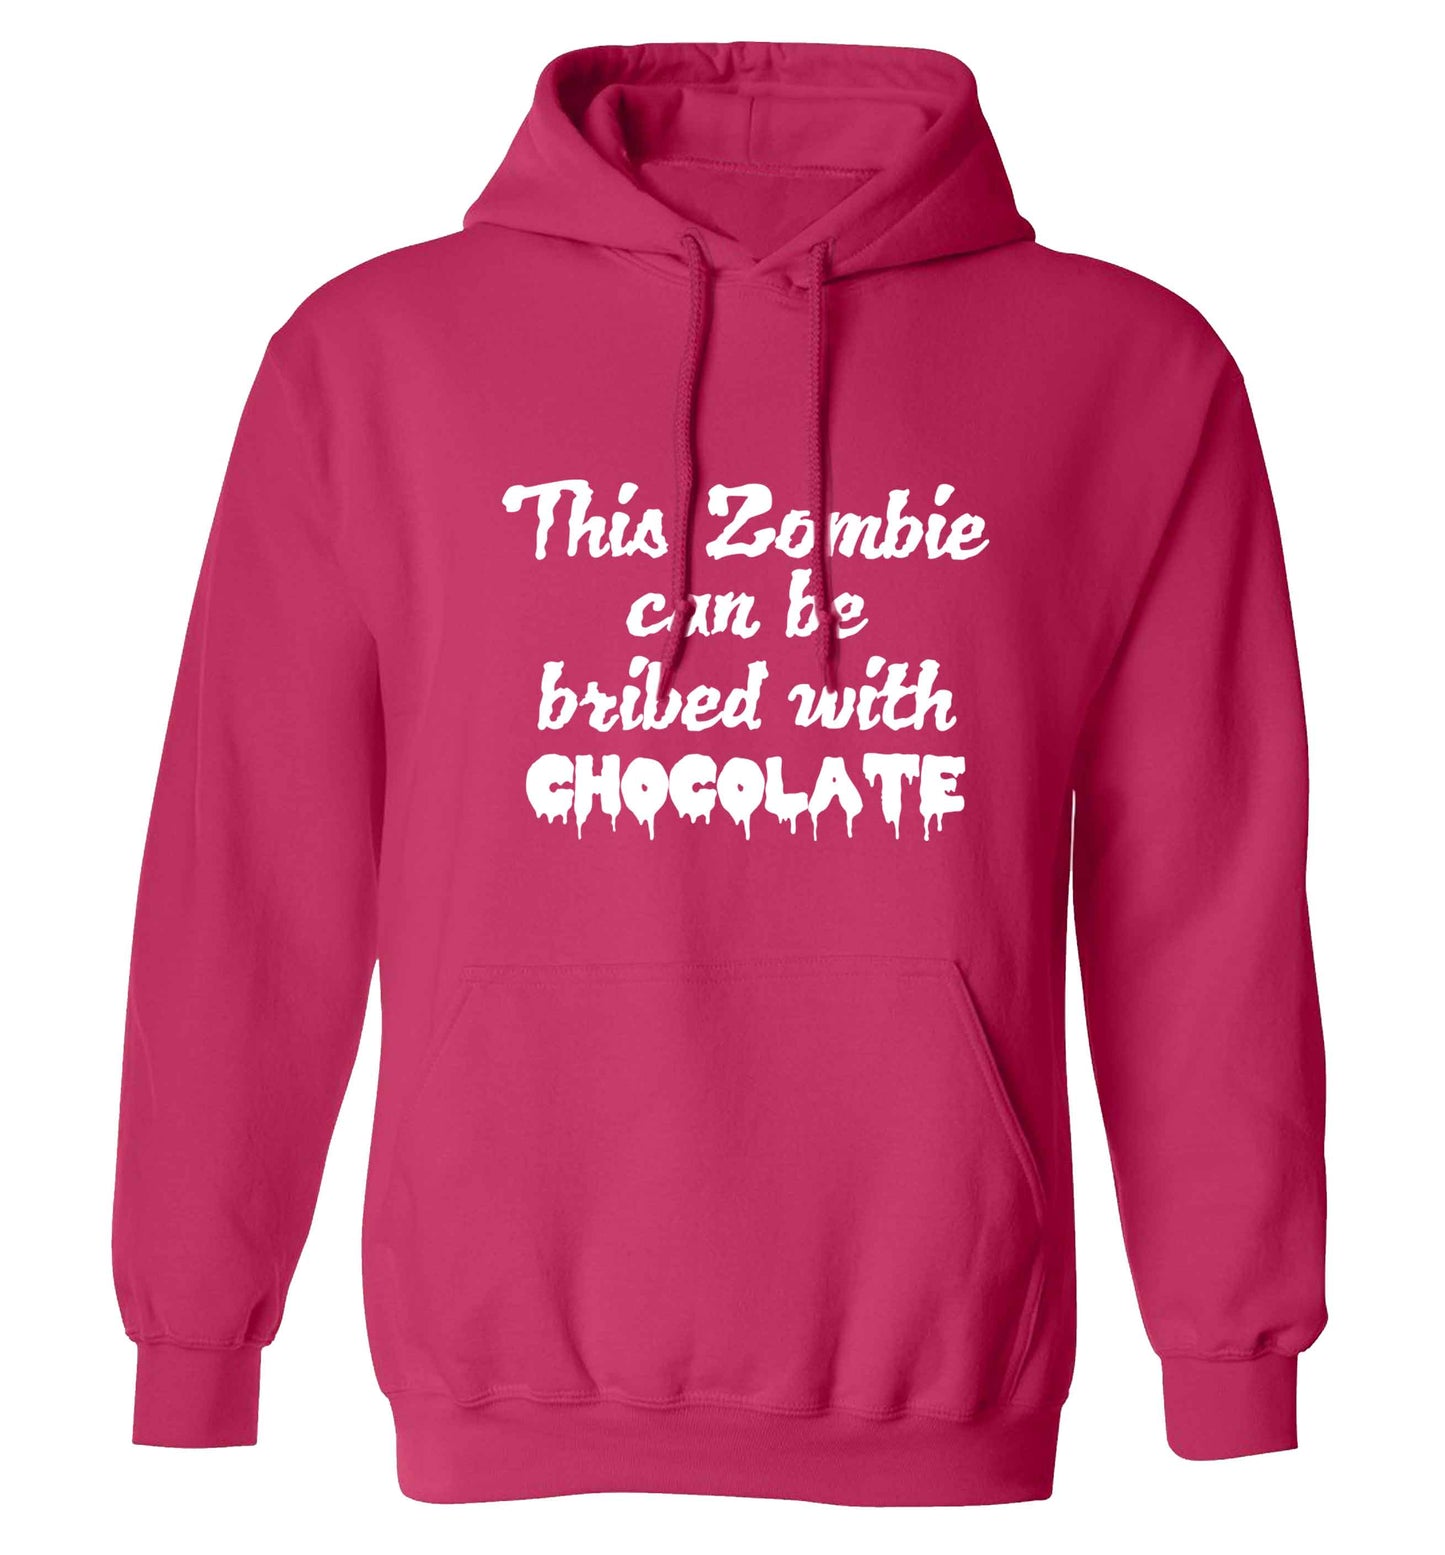 This zombie can be bribed with chocolate adults unisex pink hoodie 2XL